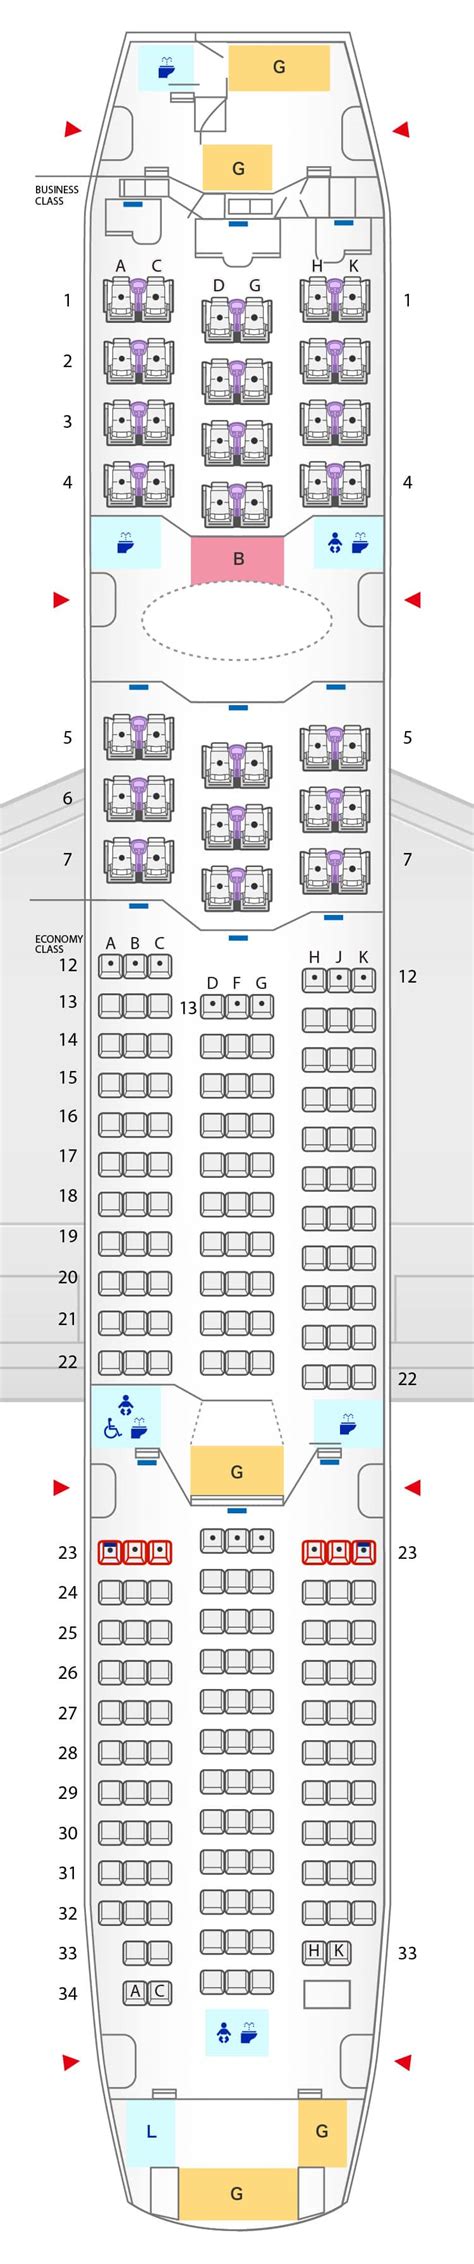 American Airlines Seat Map 787 9 Tutor Suhu